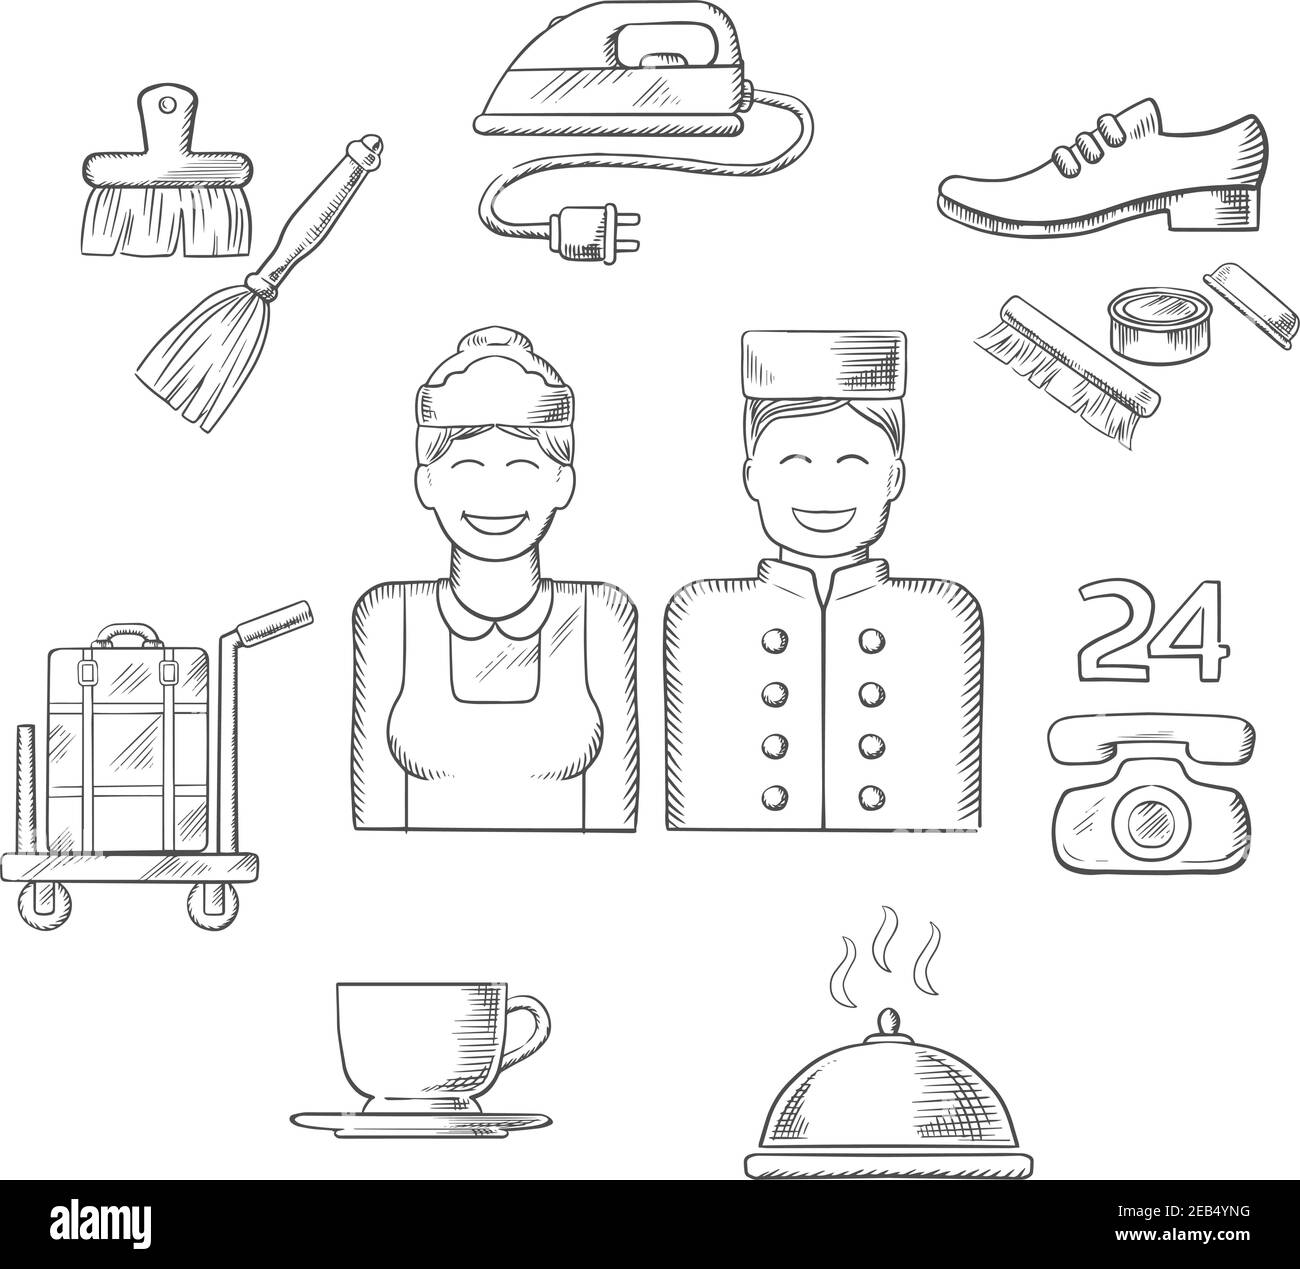 Hotel service icons in sketch style with bell boy, maid, ironing and breakfast, cleaning and laundry, luggage and shoeshine Stock Vector